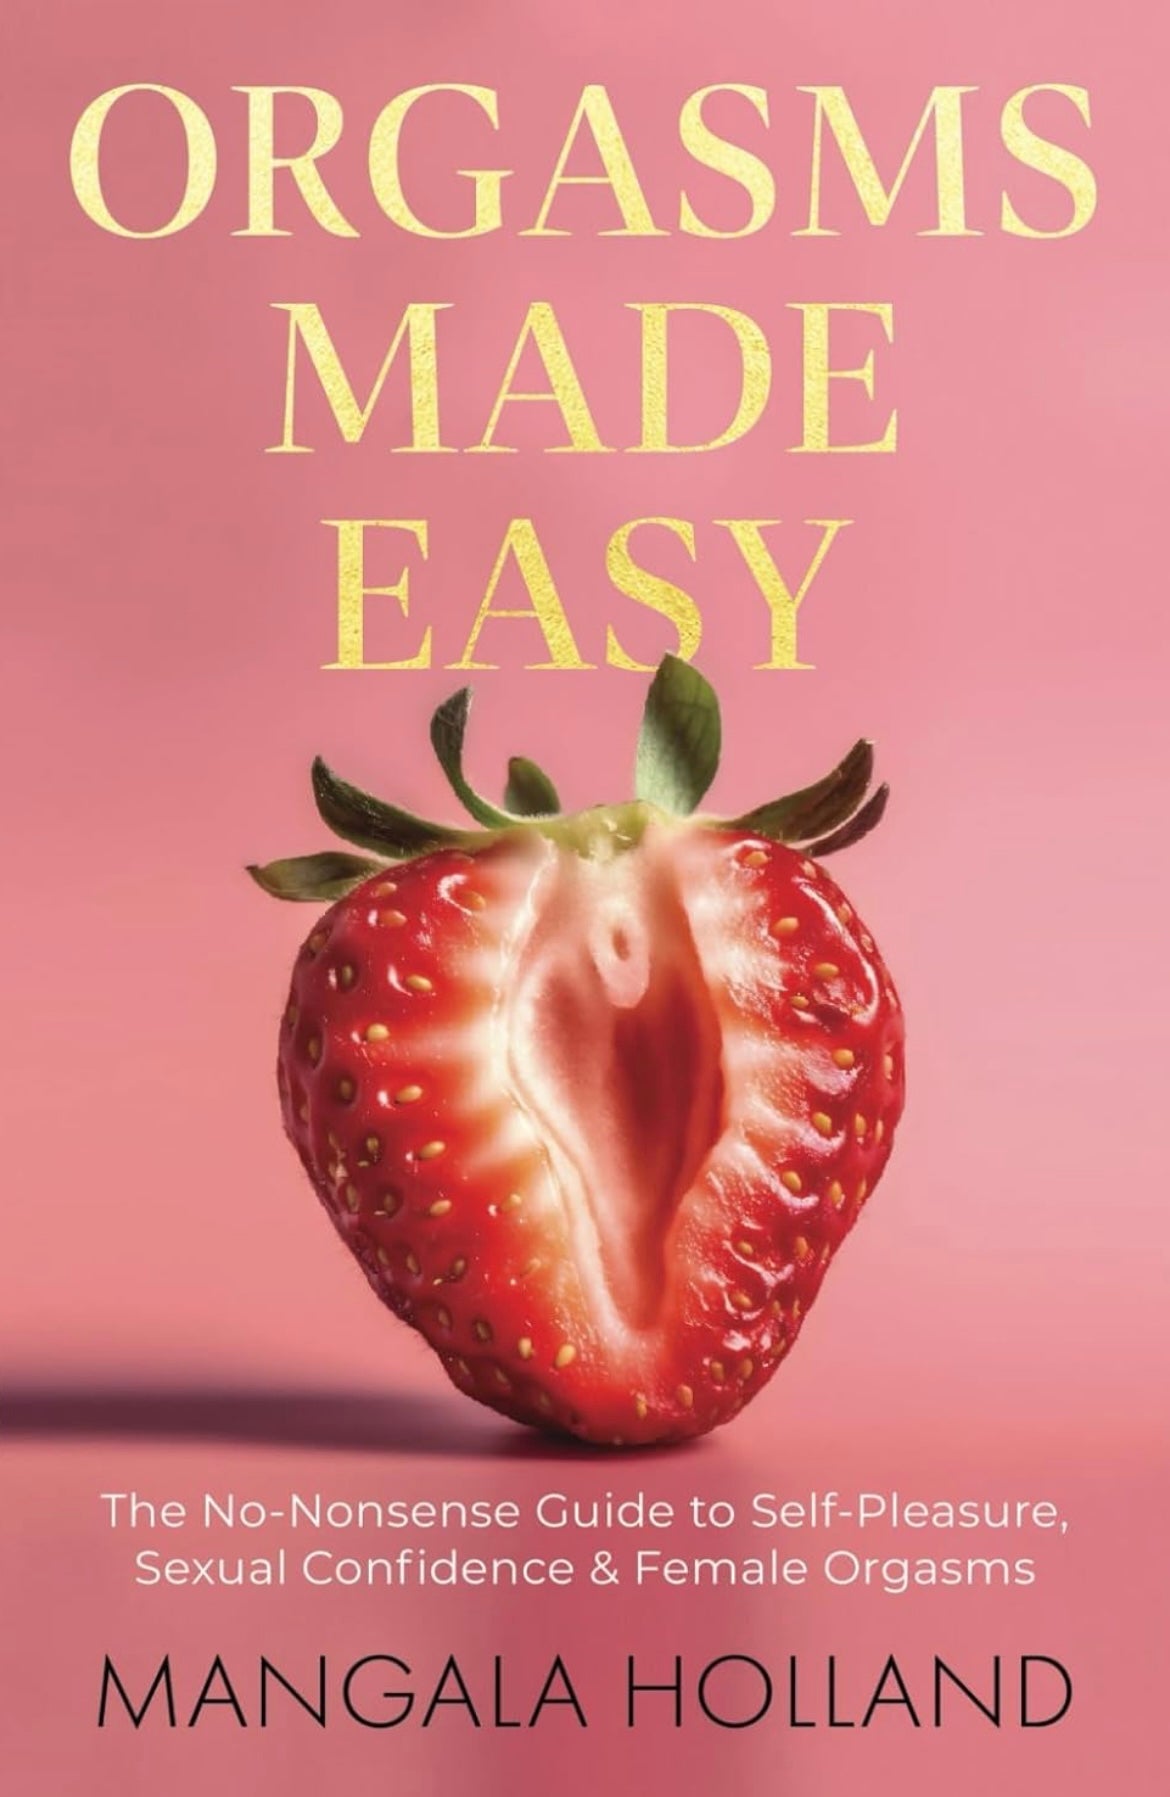 Orgasms Made Easy: The No-Nonsense Guide to Self-Pleasure, Sexual Confidence and Female Orgasms by Mangala Holland (book)